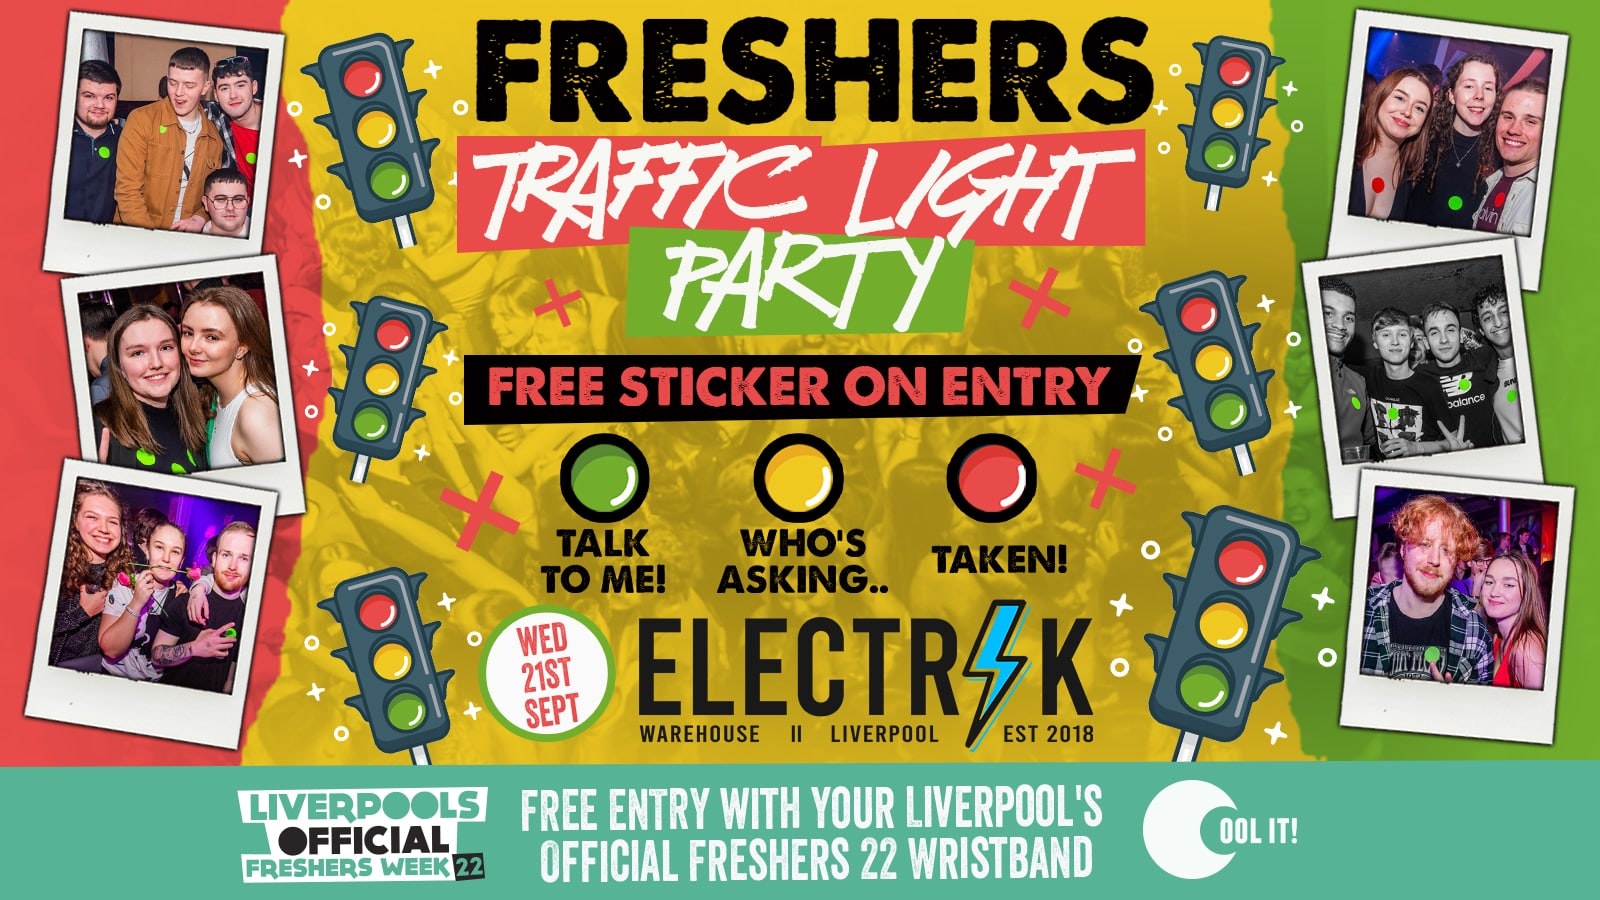 DAY 4 – The Official Freshers Traffic Light Party – FREE ENTRY WITH YOUR OFFICIAL FRESHERS WRISTBAND!